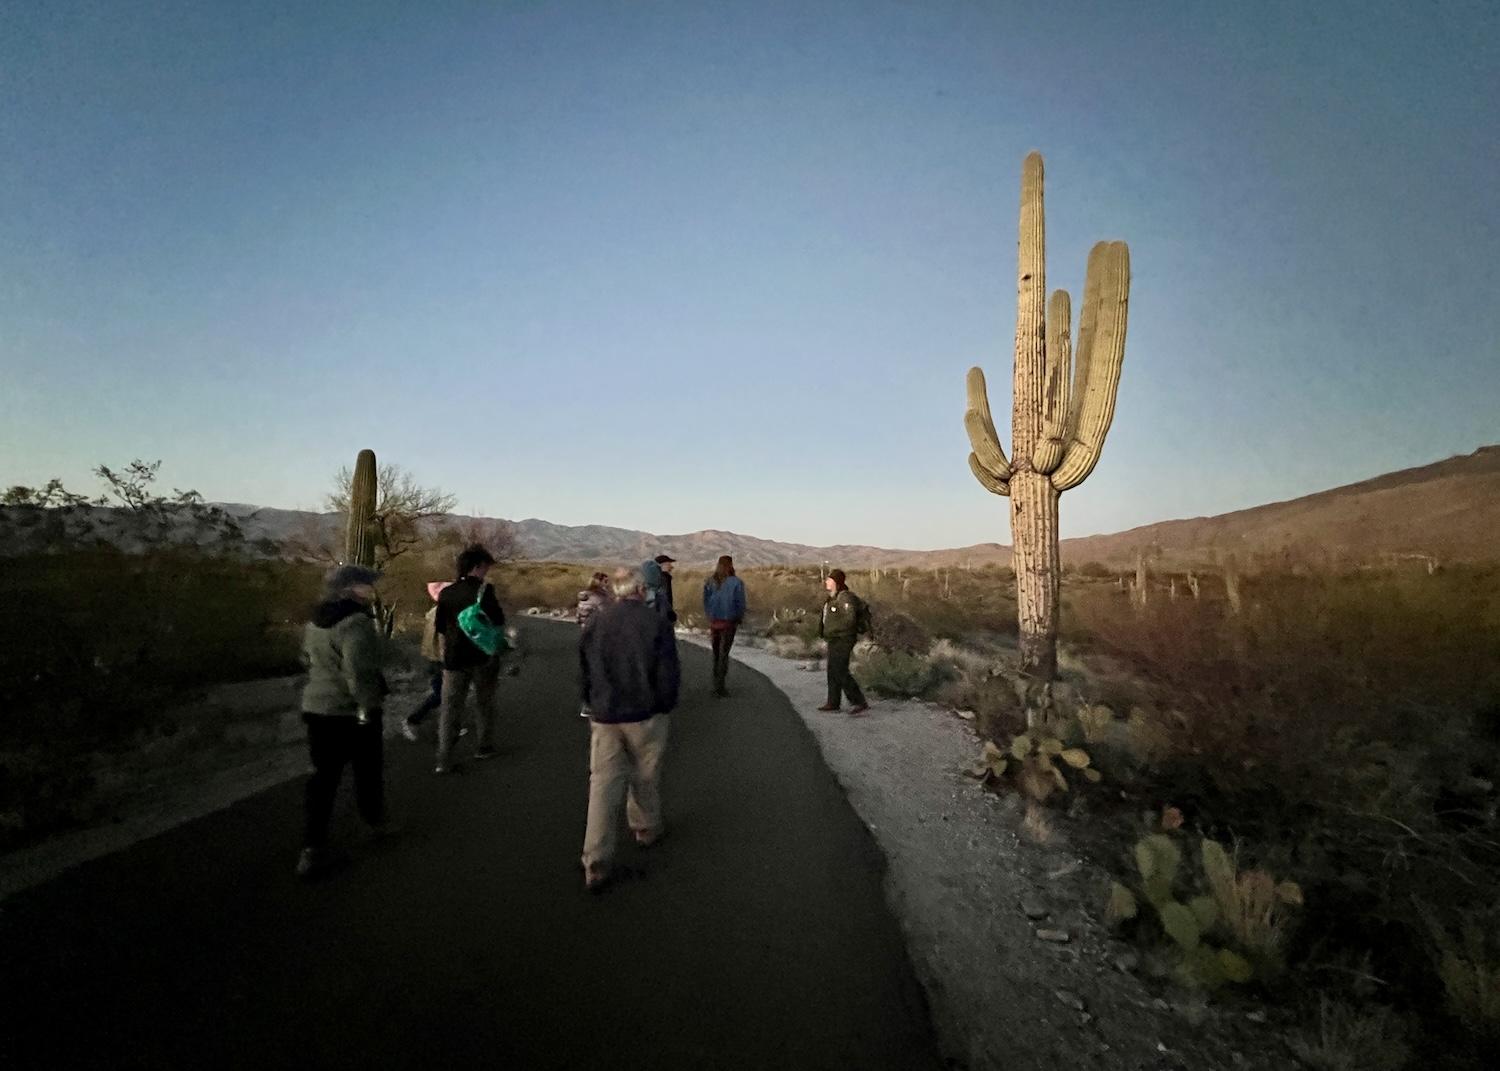 At dusk, Next Generation Ranger Malana Starr leads Saguaro National Park guests on a walk down Cactus Forest Drive.